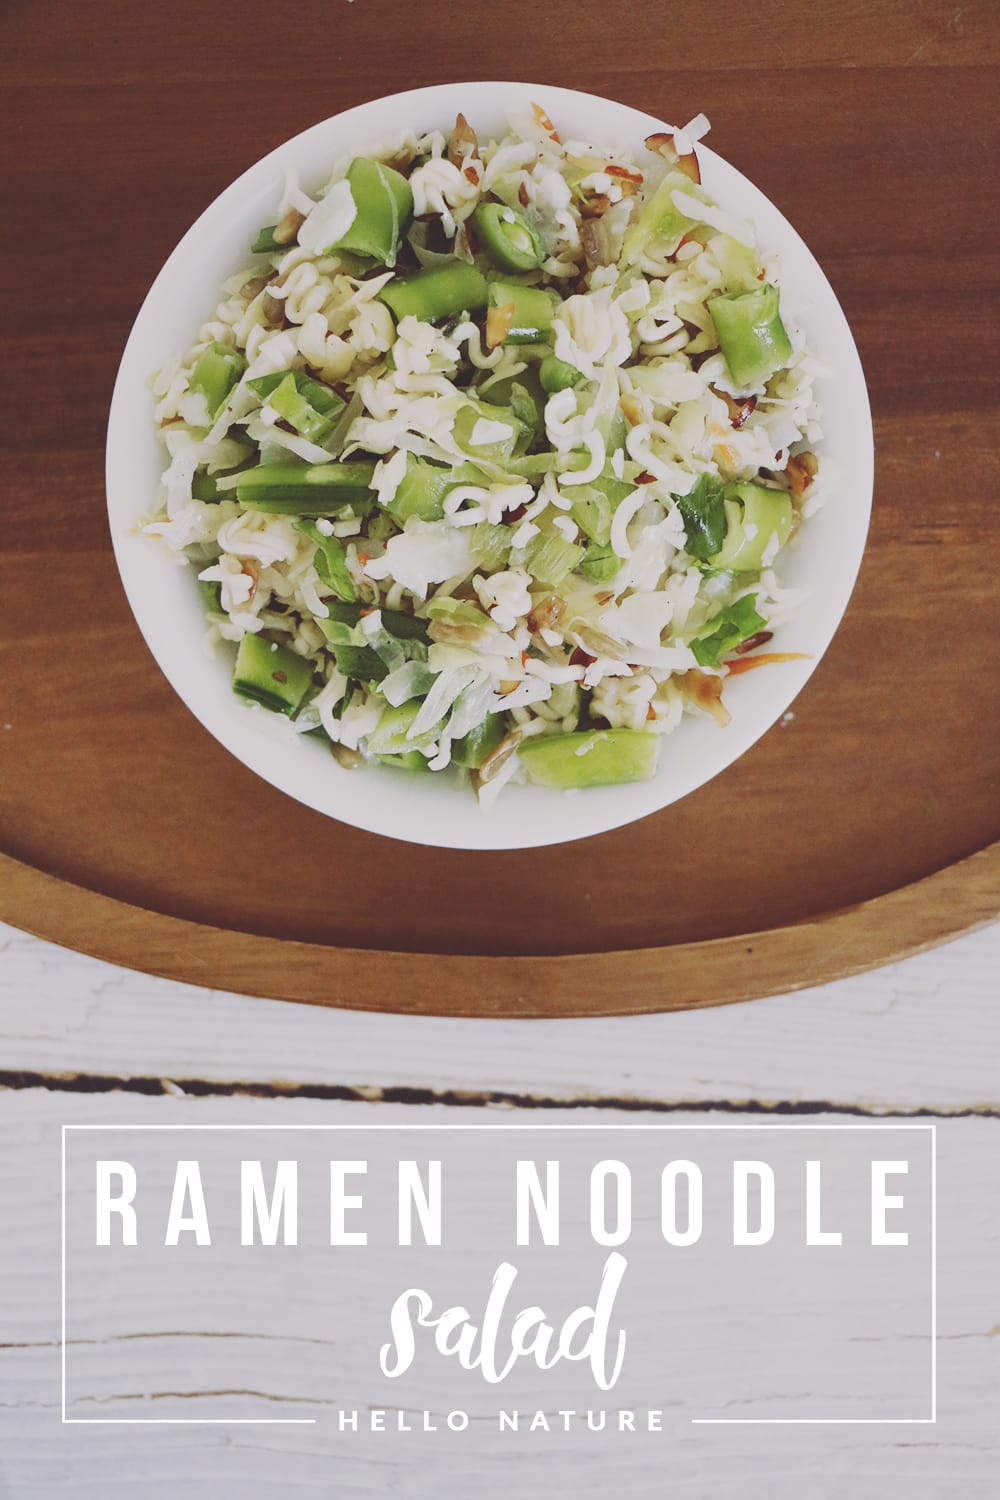 This ramen noodle salad recipe is perfect for Summer get-togethers and picnics! It's light, delicious and super simple to make!